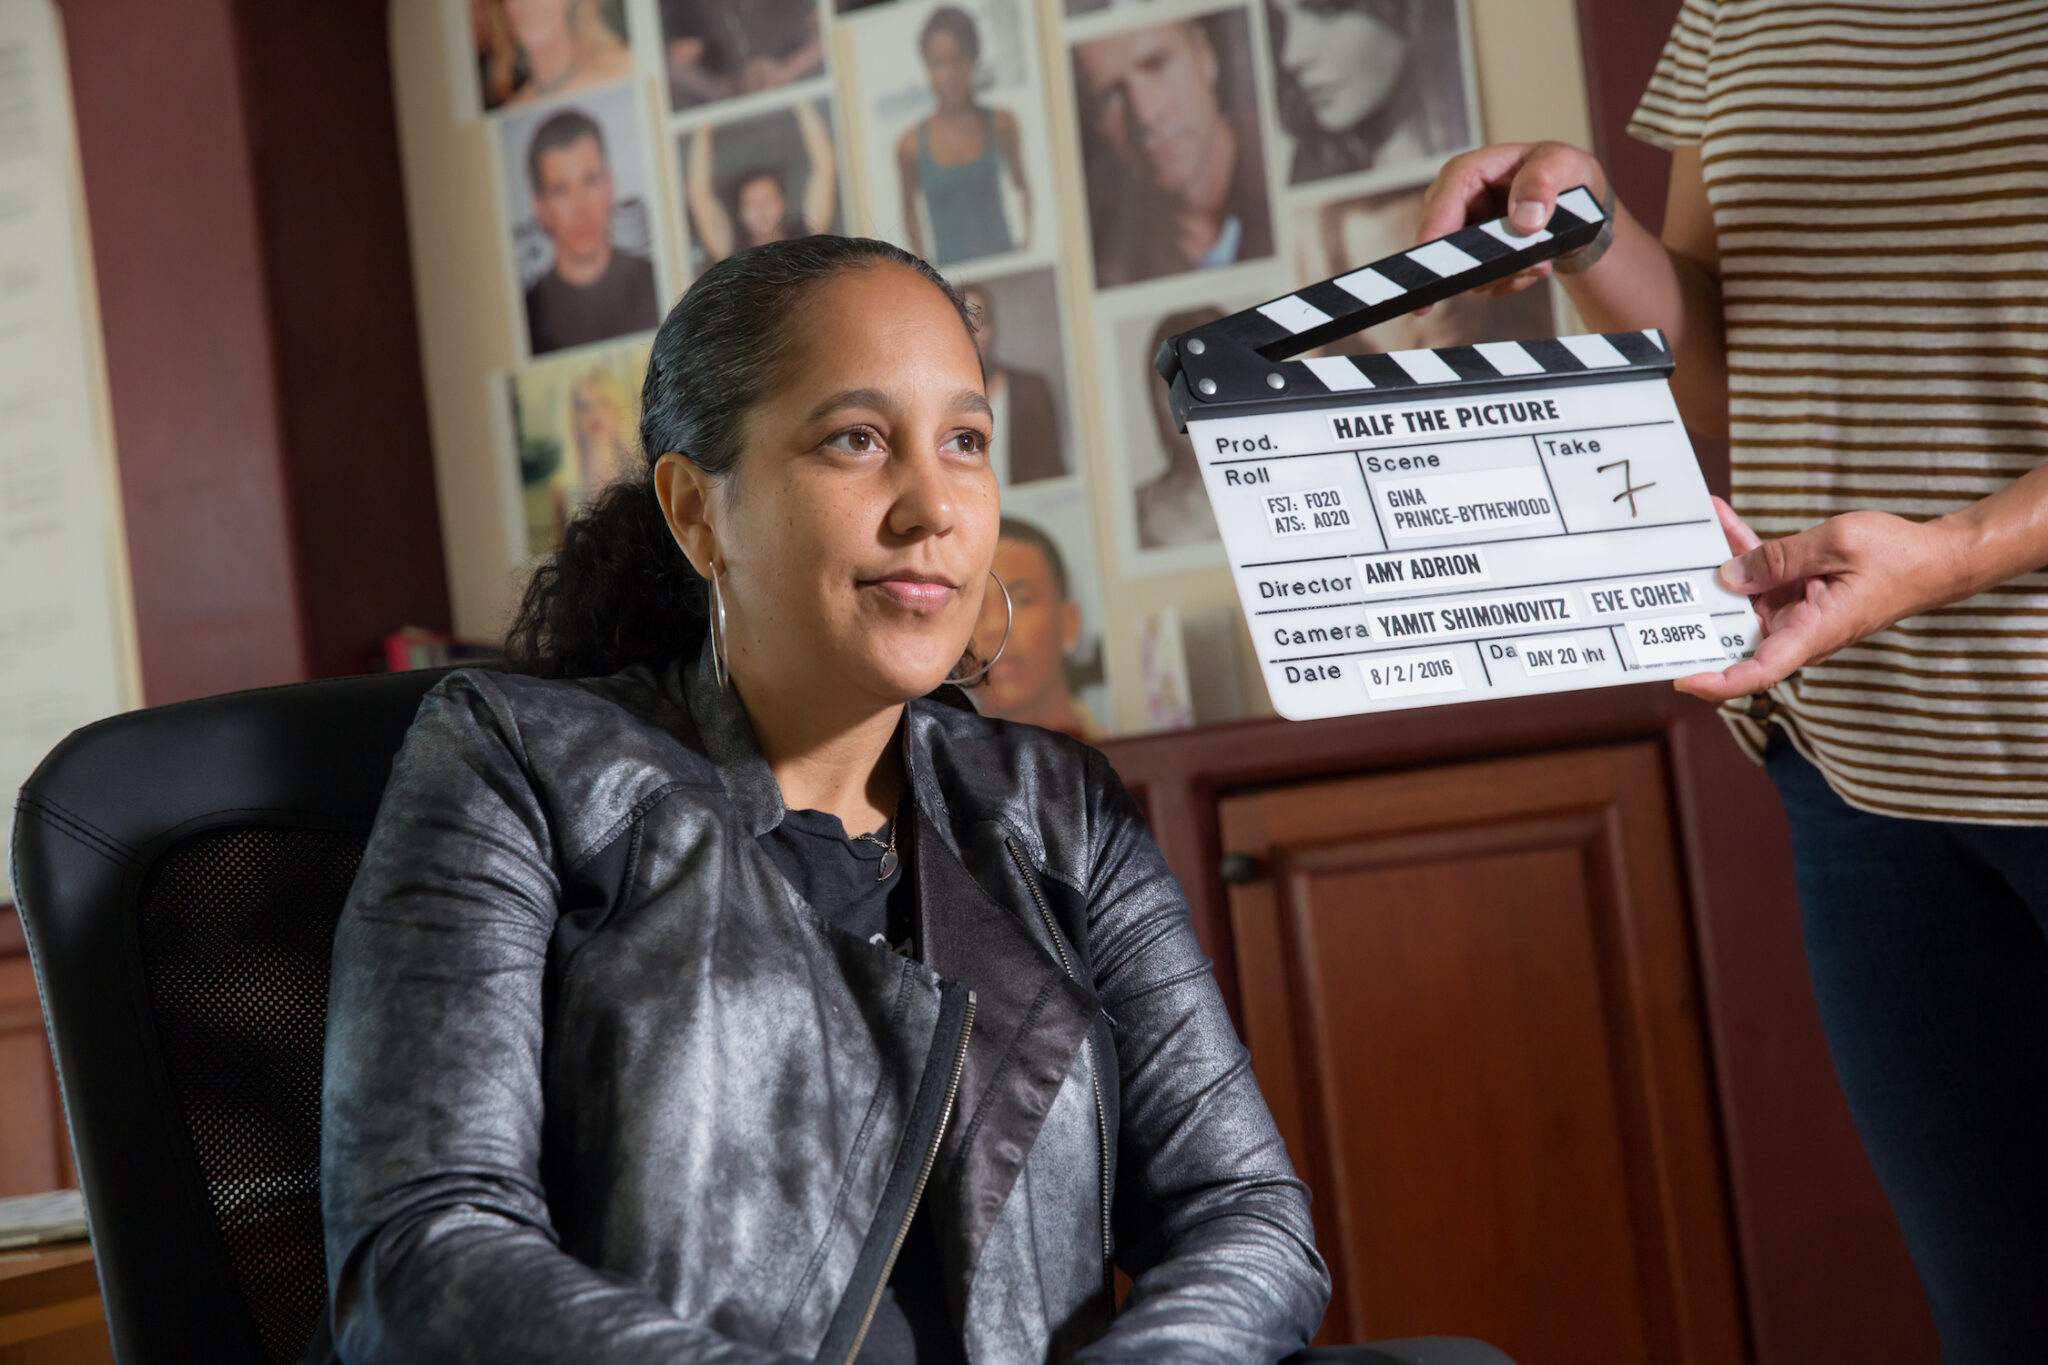 A Black woman looks at the camera as a director stands in front